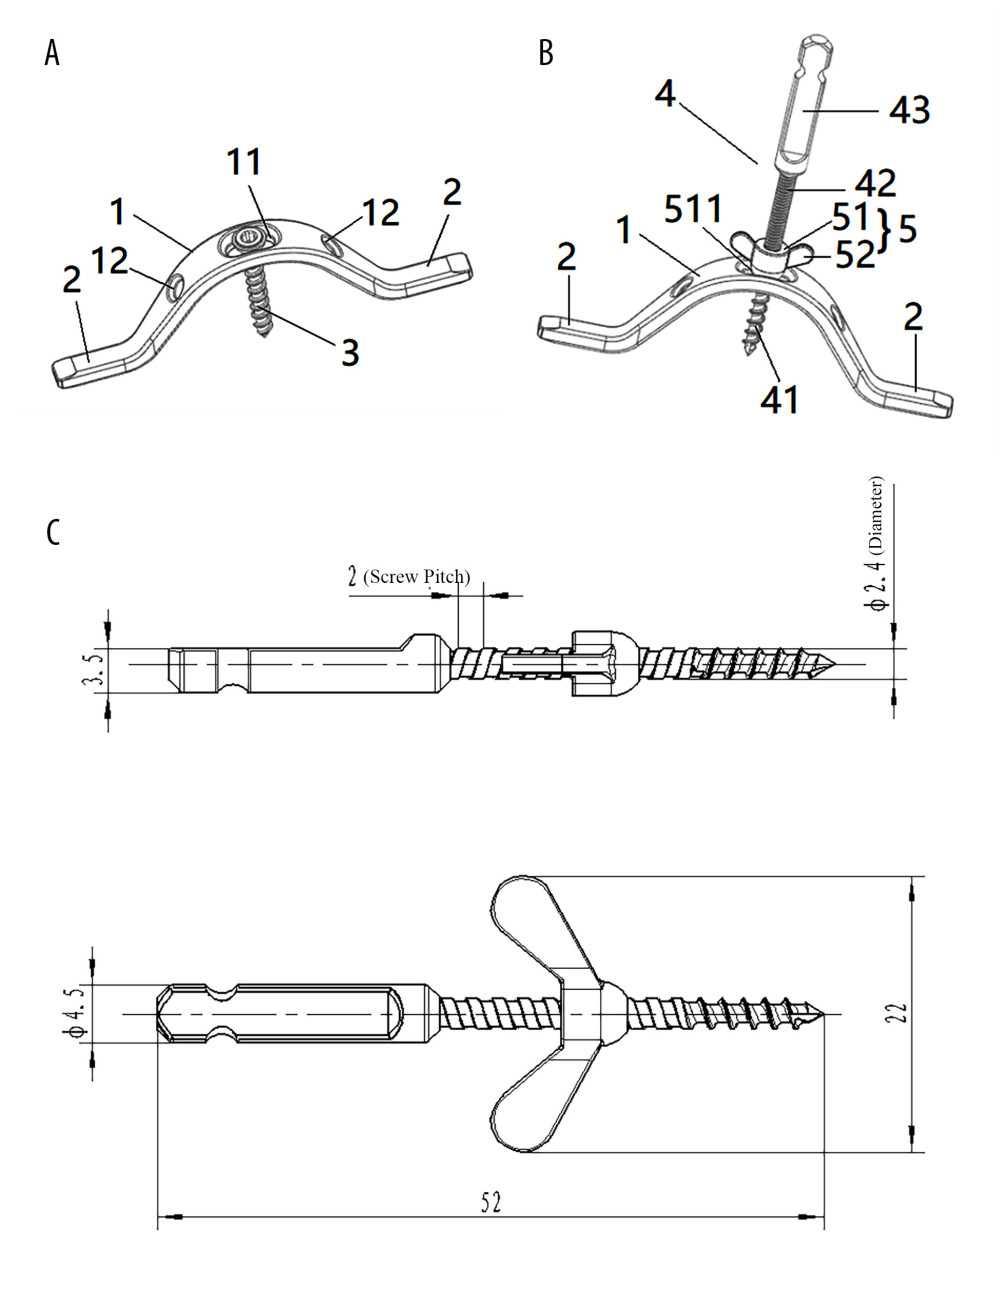 Structure diagram of the cross-bridge and lifting rod.(A) 1. Curved plate body (11. Laminar connecting orifice; 12. Fixing orifice); 2. Extend the fixed part; 3. Laminae fixation screws; (B) 1. Curved plate body; 2. Extension part; 4. Pull rod (41. First thread section; 42. Second thread section; 43. Standard quick interface); 5. Pull nut (51. Cylindrical body; 52. Drive lugs; 511. Tapered contact part). (C) Structure diagram of the lifting rod.